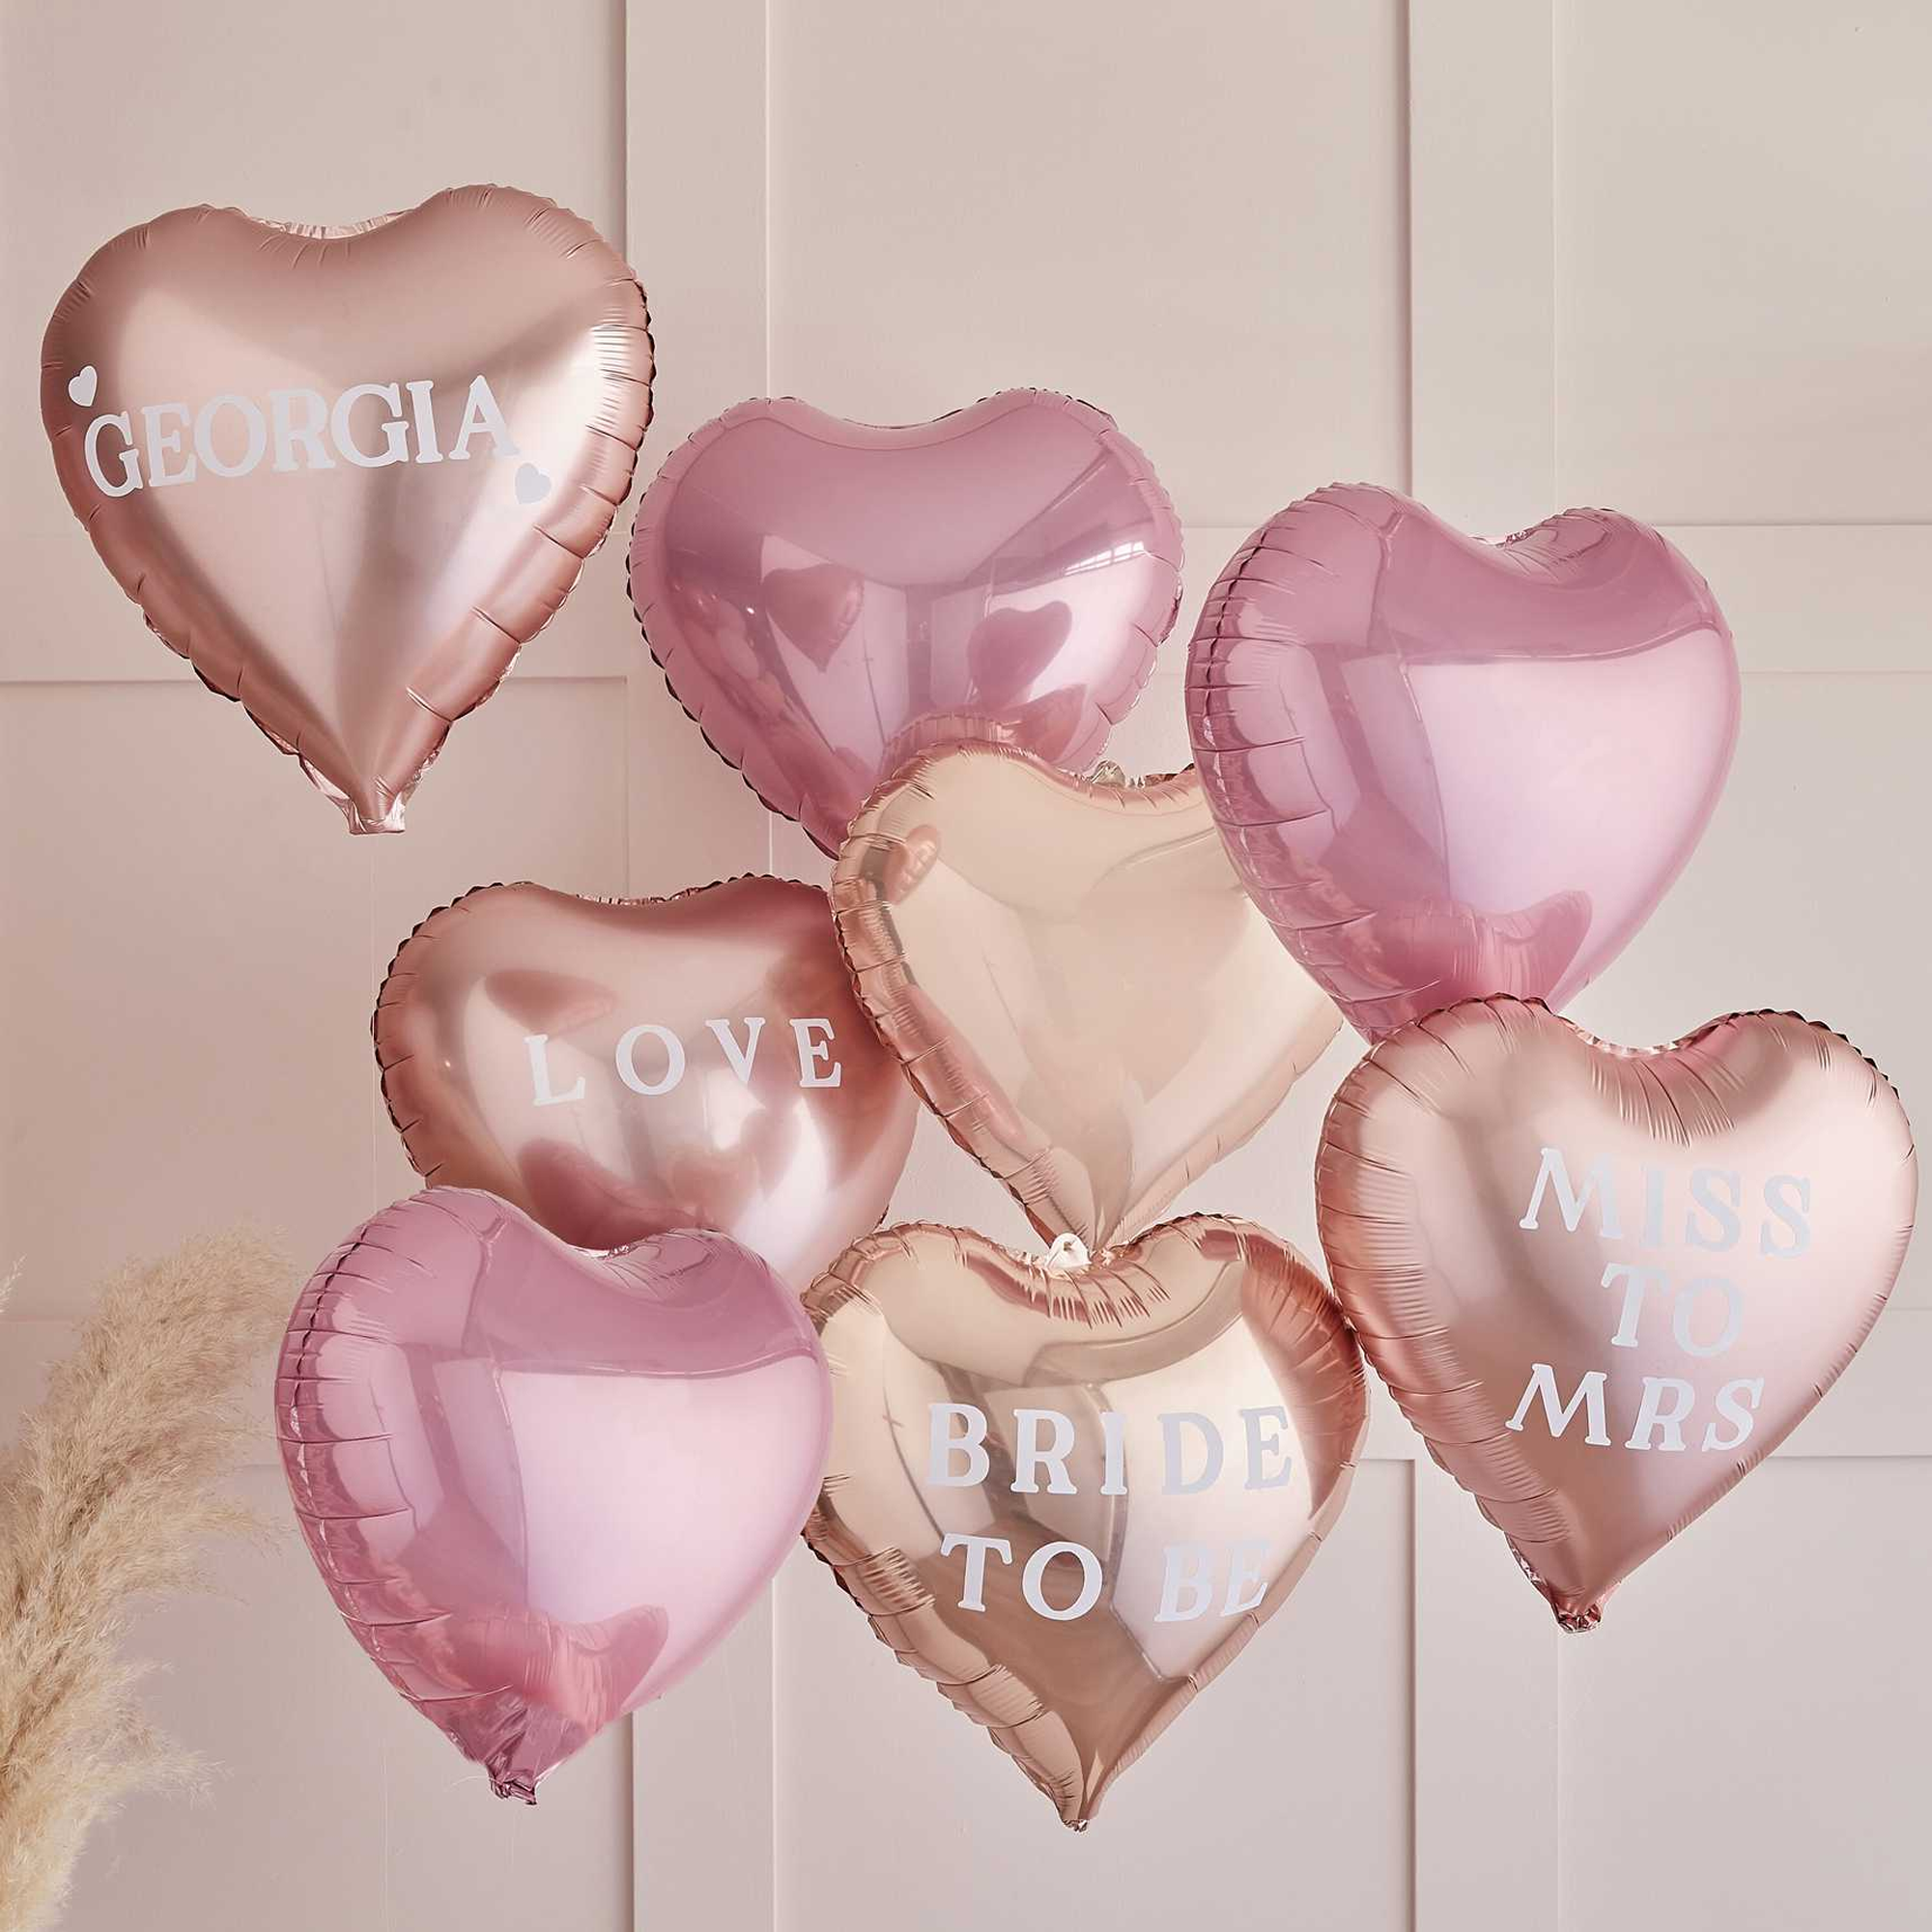 10 Easy Tips To Create a Balloon Display!